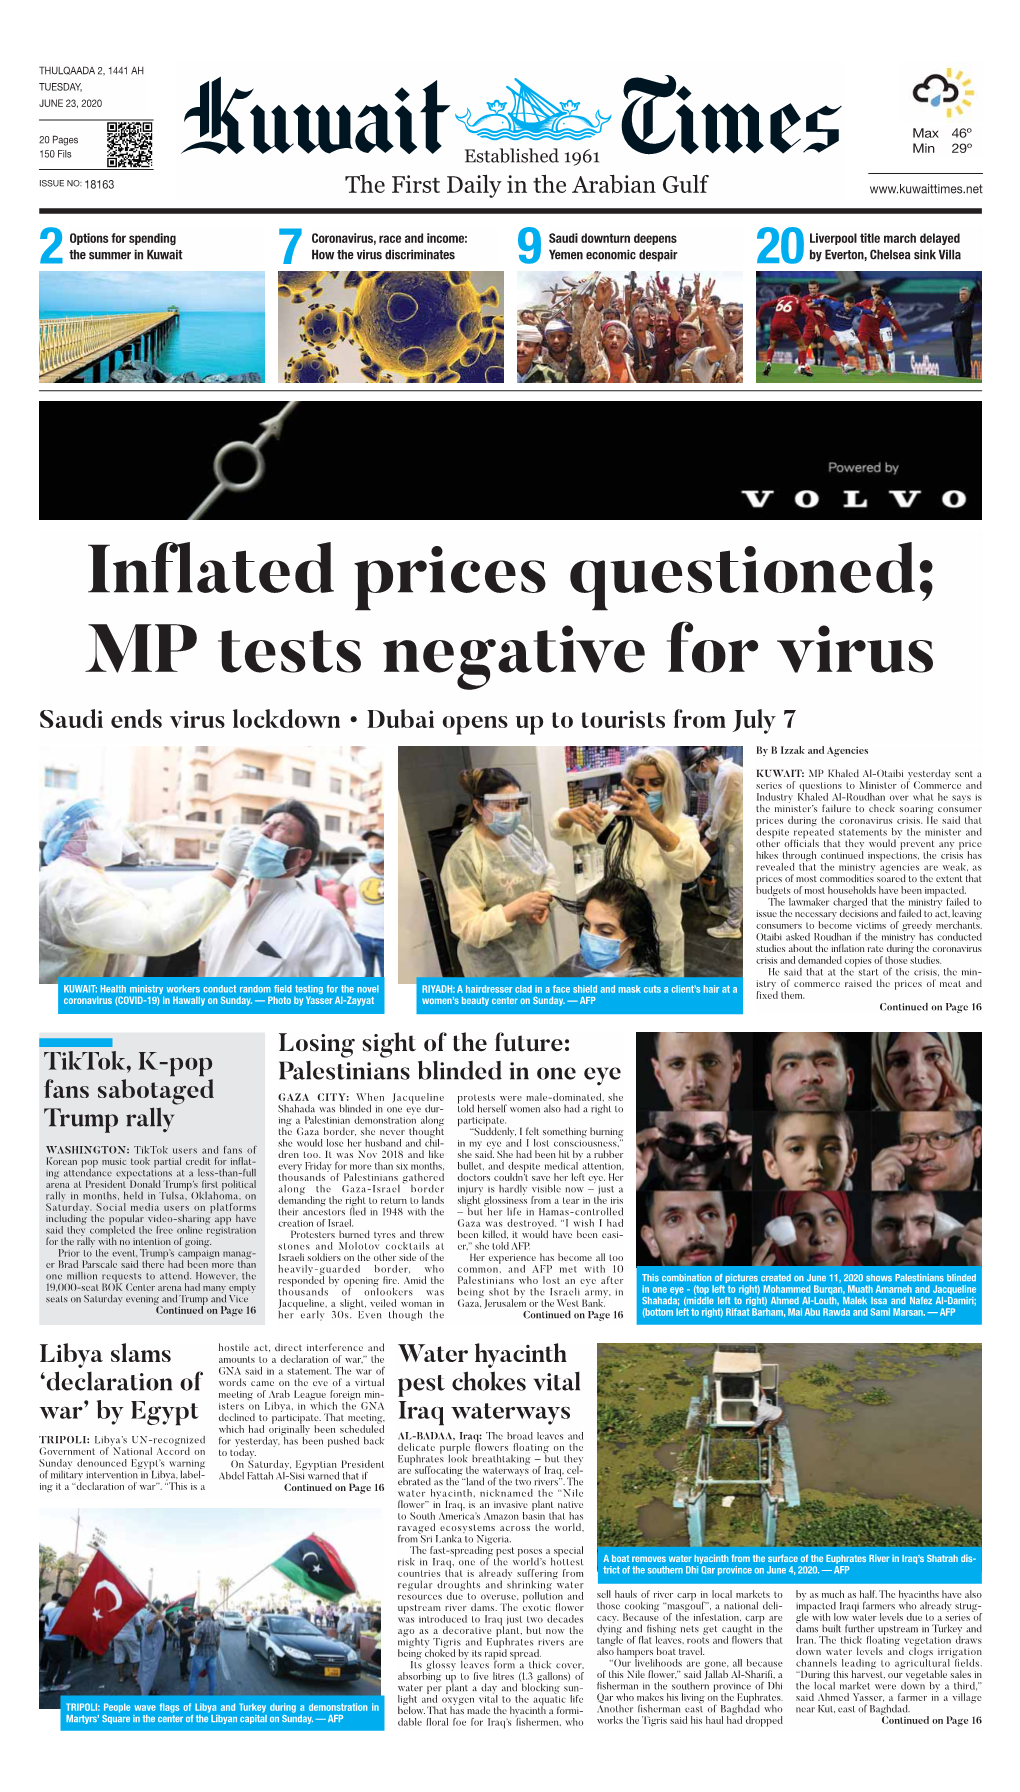 Inflated Prices Questioned; MP Tests Negative for Virus Saudi Ends Virus Lockdown • Dubai Opens up to Tourists from July 7